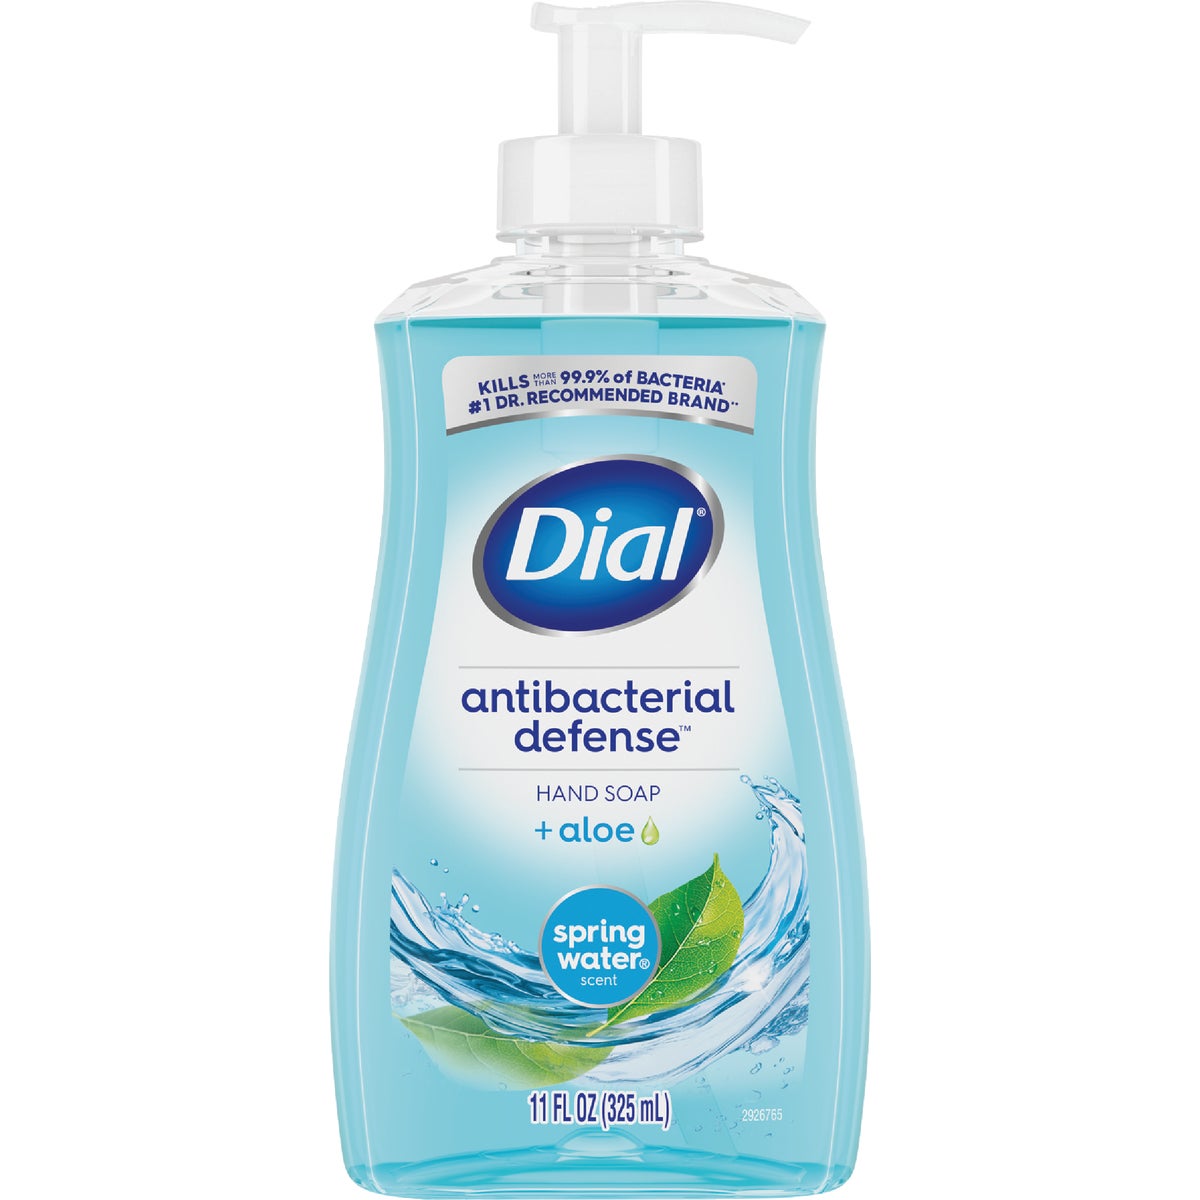 Item 601523, Antibacterial Defense soap with vitamin E removes dirt and germs while 